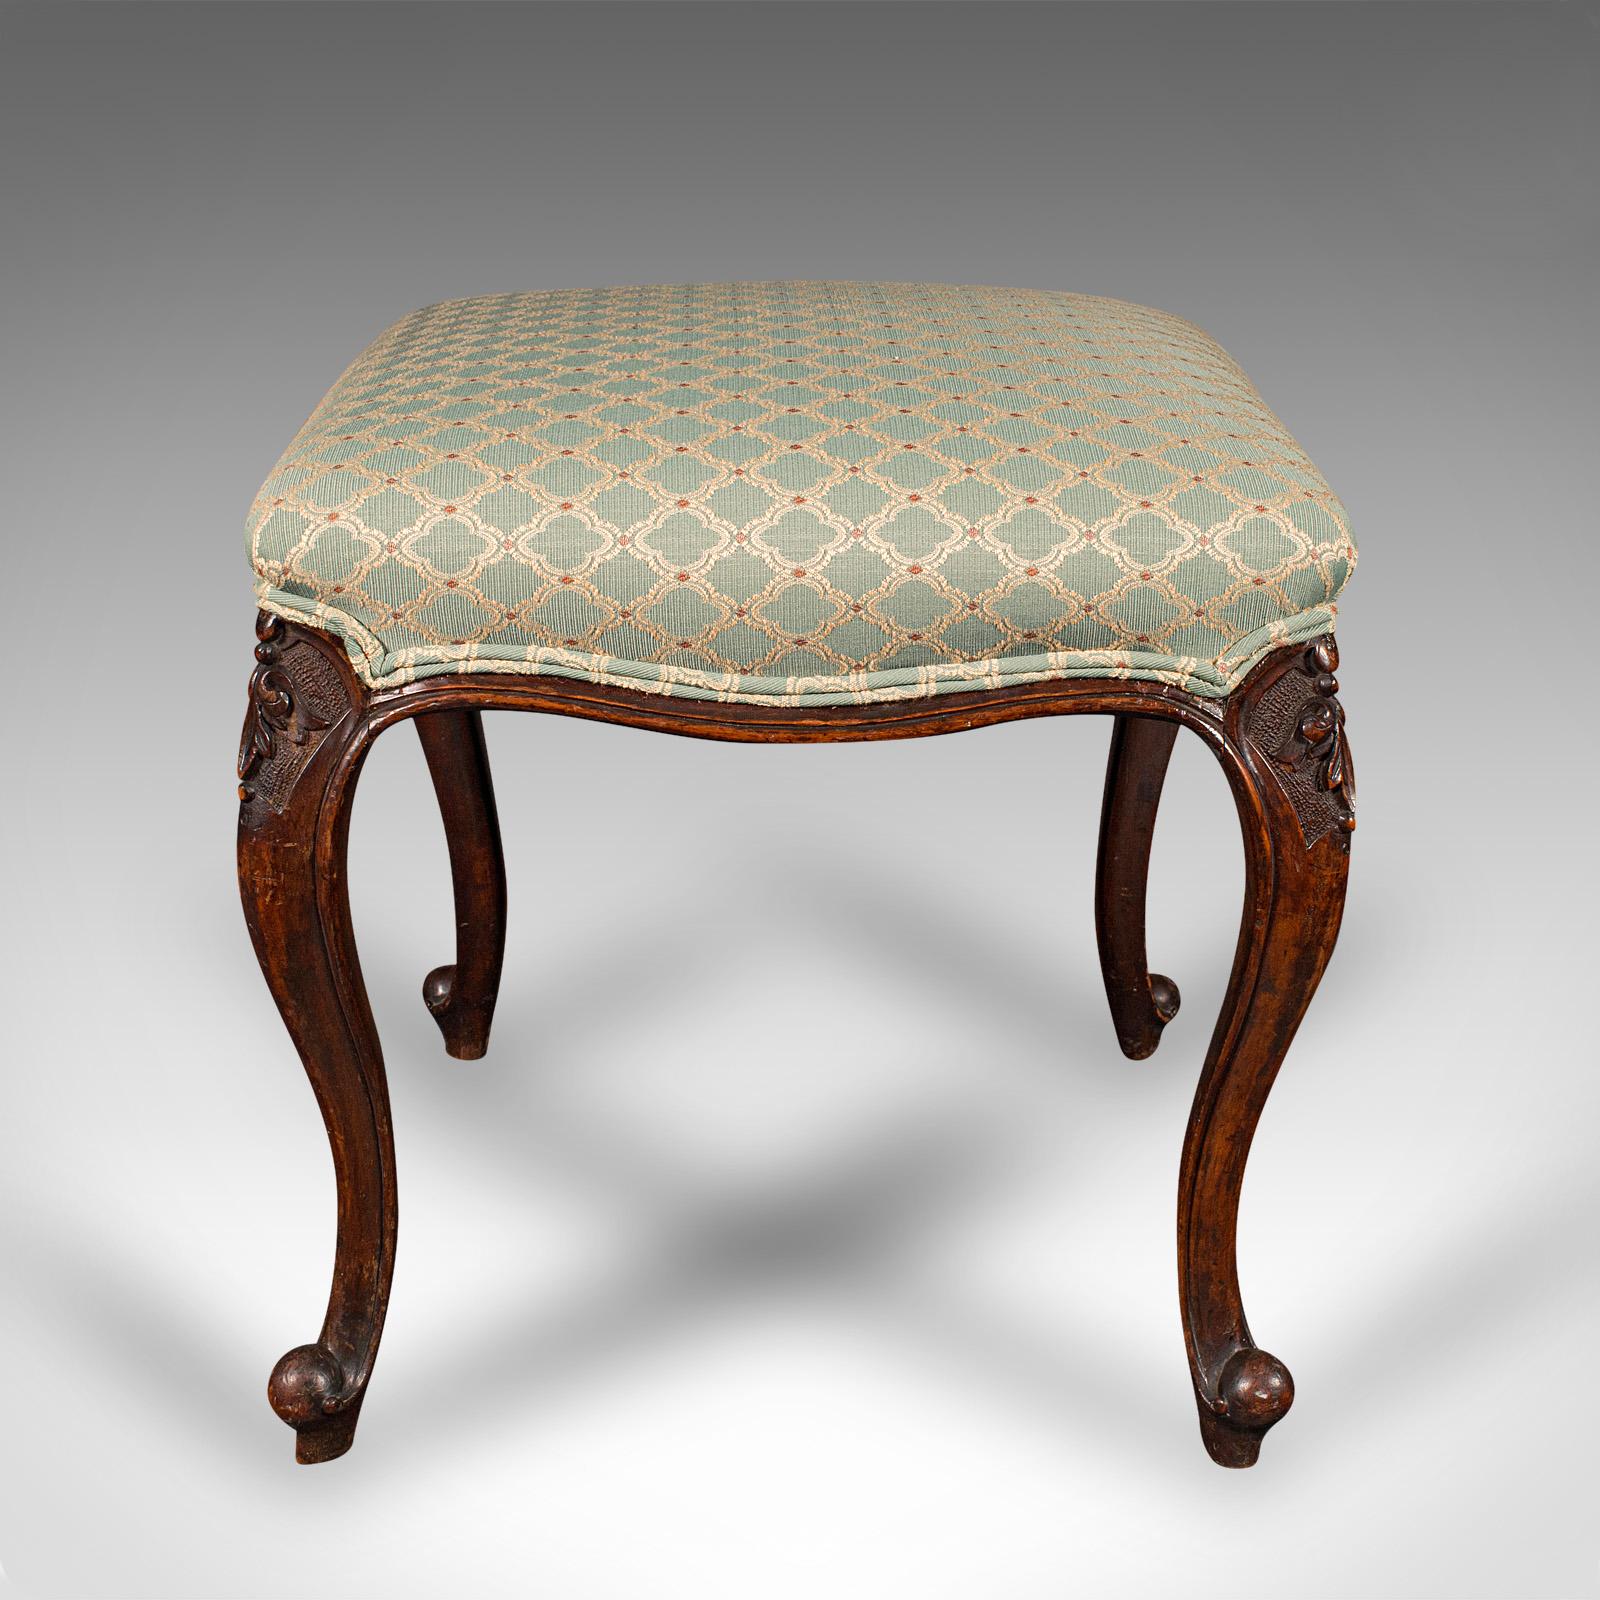 This is an antique dressing stool. An English, walnut footstool, dating to the early Victorian period, circa 1840.

Beautifully presented stool with quality upholstery and finish
Displaying a desirable aged patina and in good order
Appealing